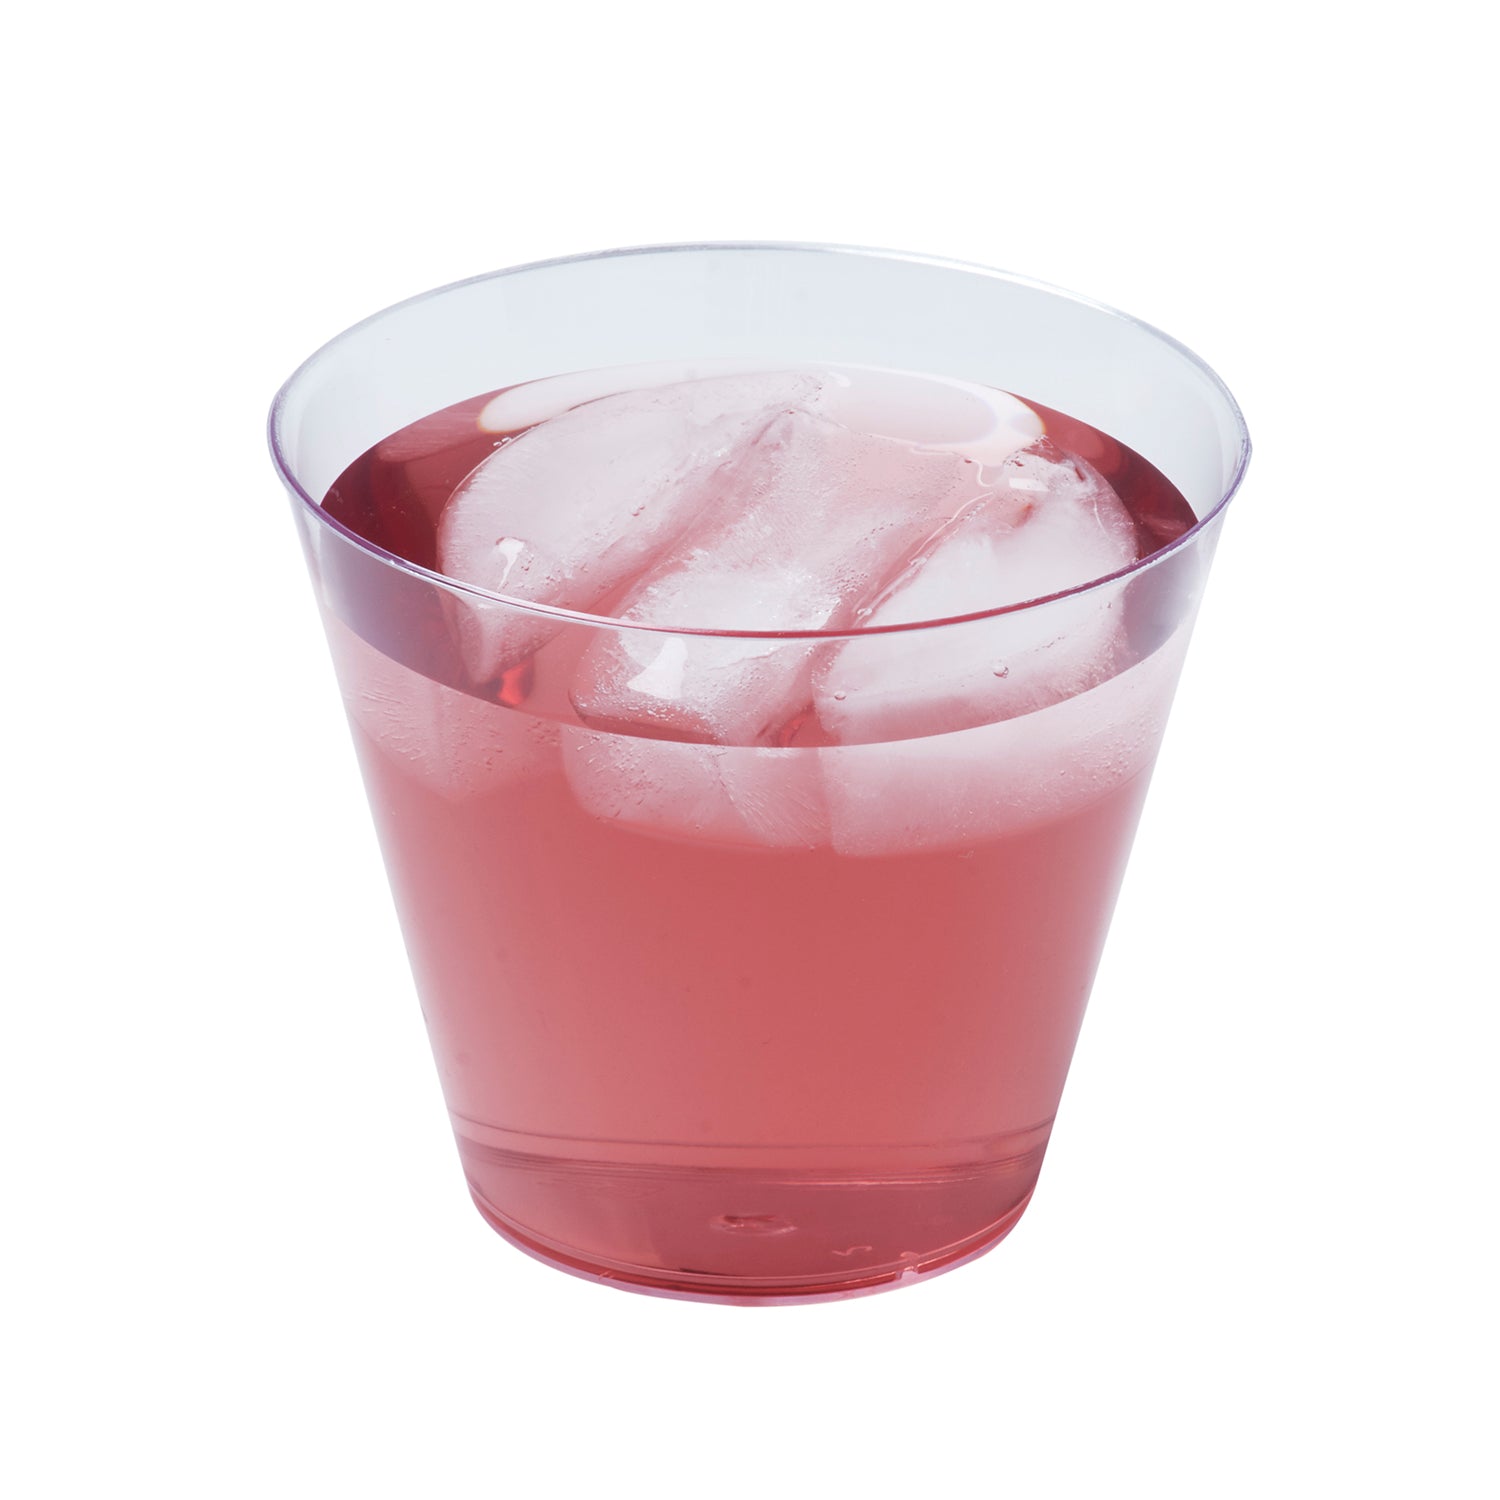 9 oz. Plastic Cups - Old Fashioned style cups 200 ct. – Select Settings